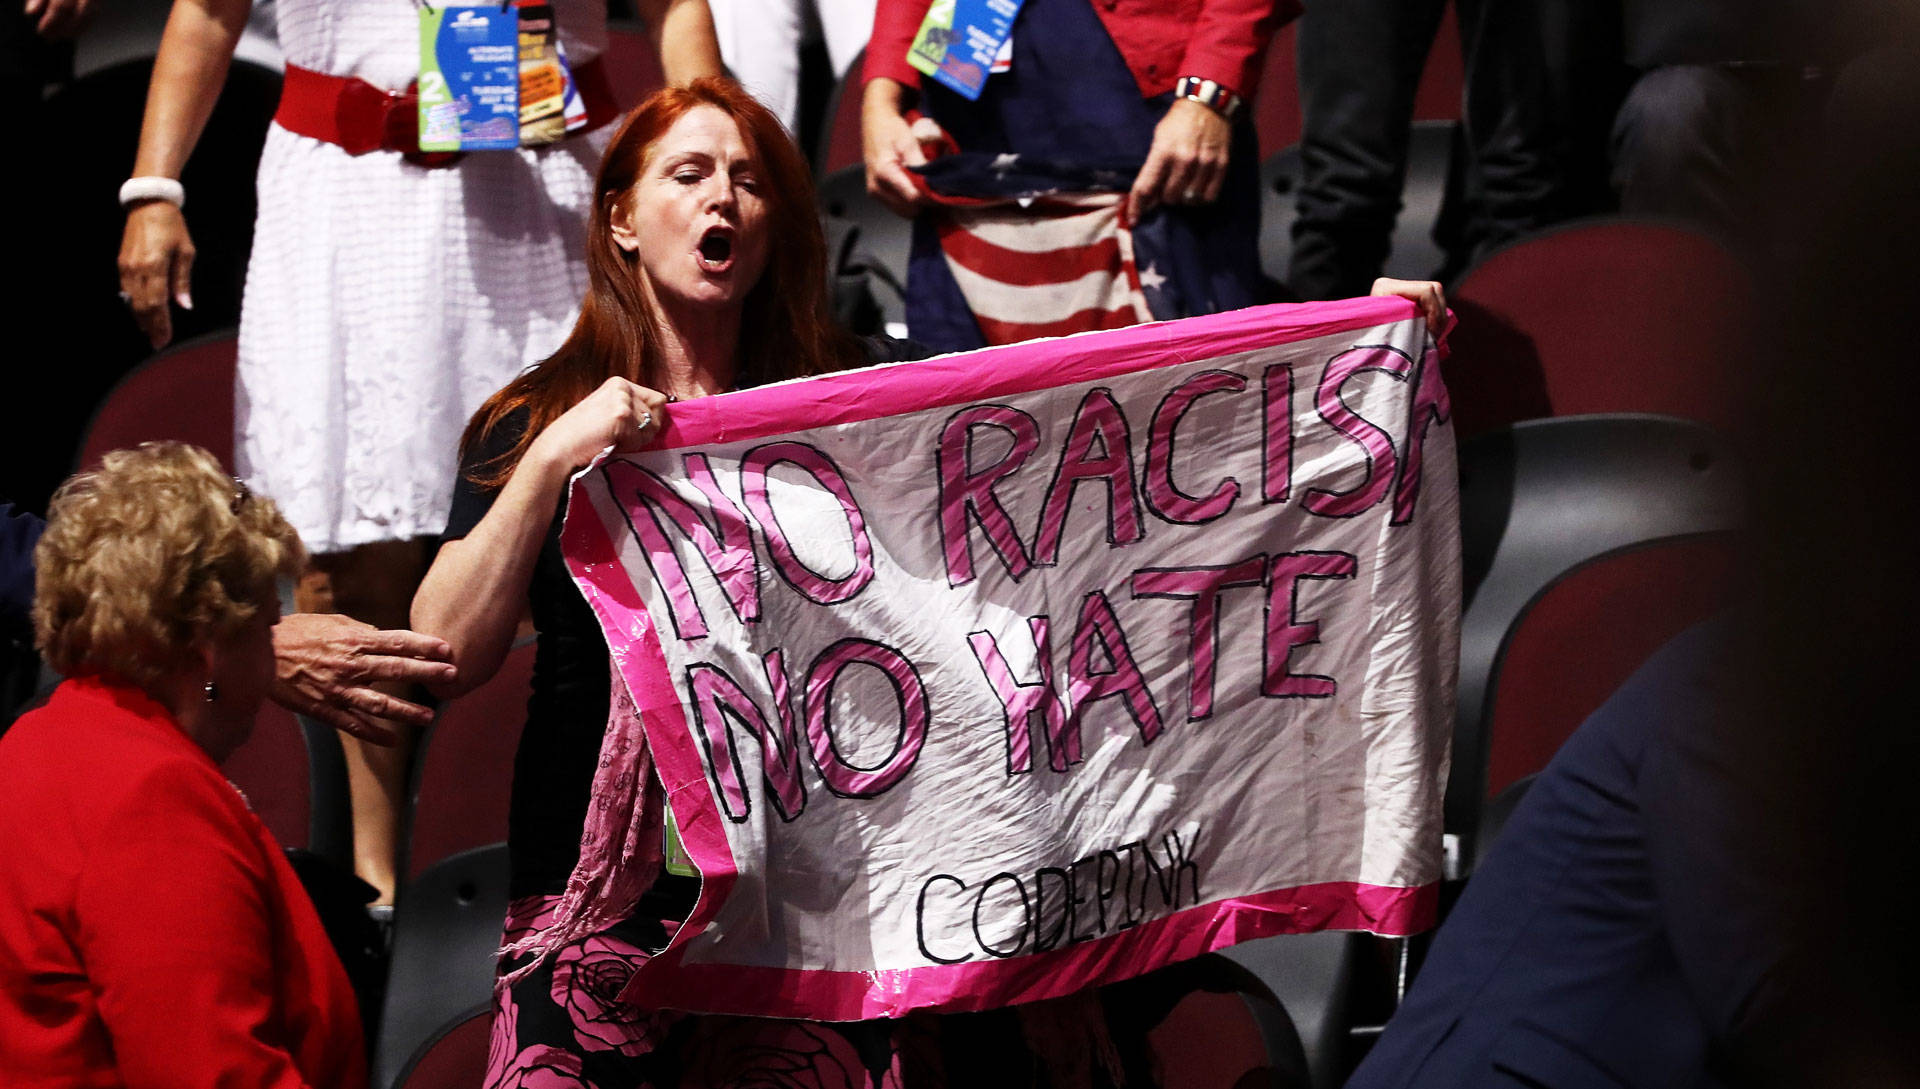 A member of Code Pink demonstrates during former Republican presidential candidate Ben Carson's speech on the second day of the Republican National Convention on July 19, 2016. Win McNamee/Getty Images